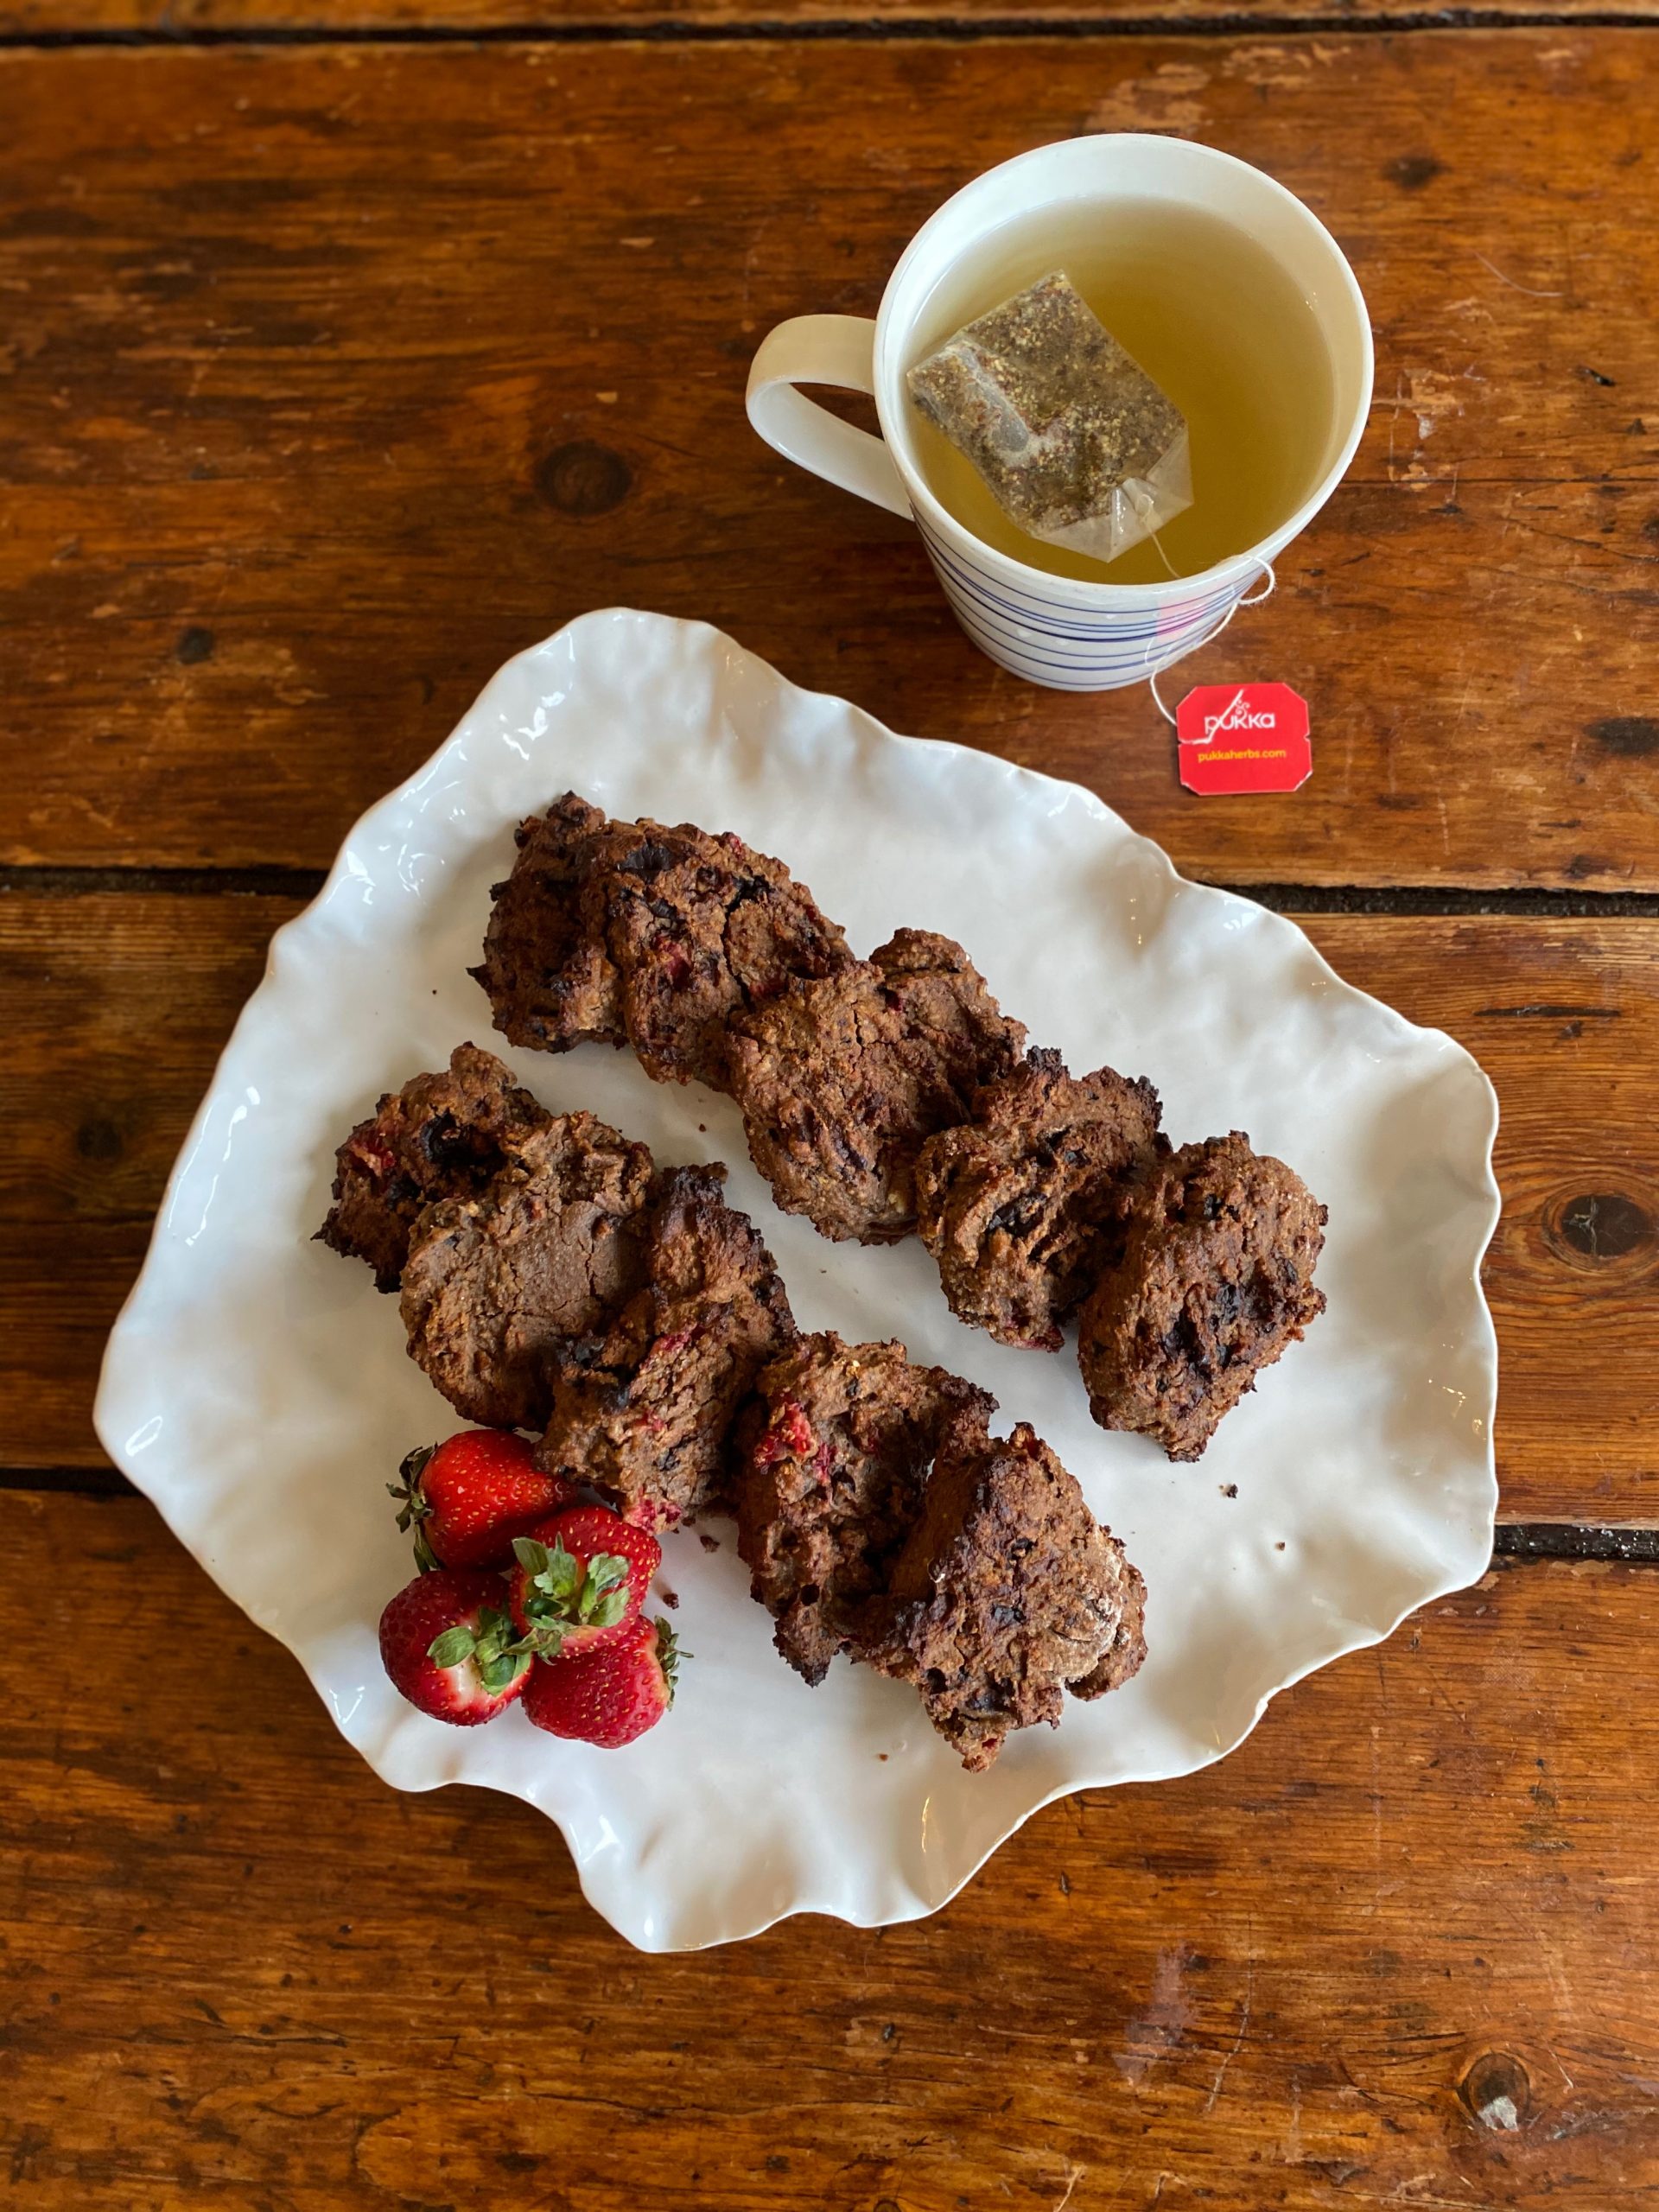 Gluten-free Chocolate Chickpea and Strawberry Cookies